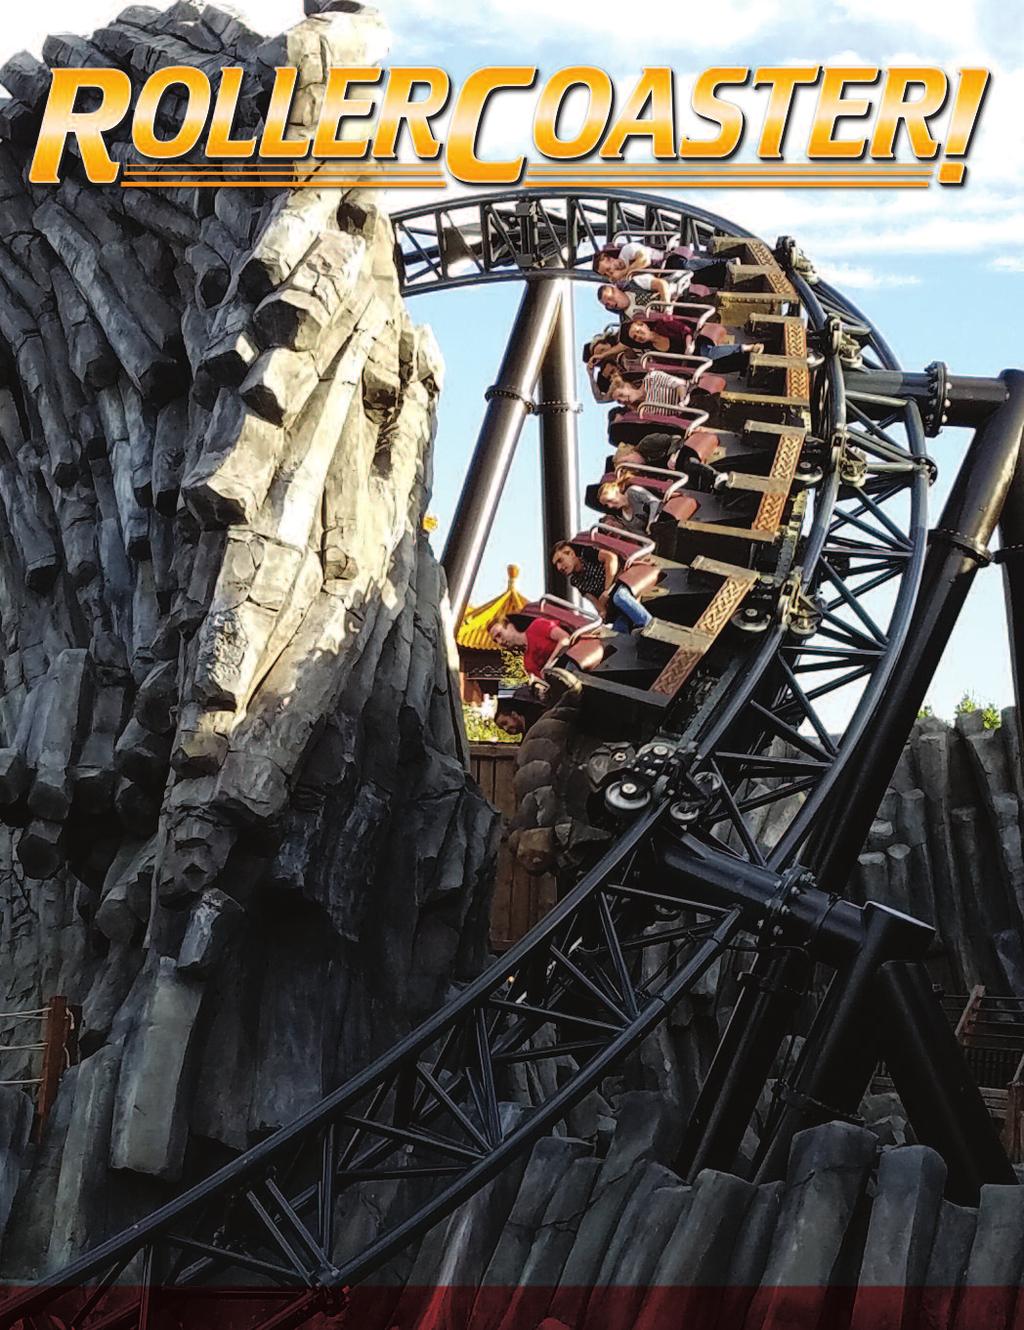 WINTER 2017 THE OFFICIAL MAGAZINE OF AMERICAN COASTER ENTHUSIASTS RC!